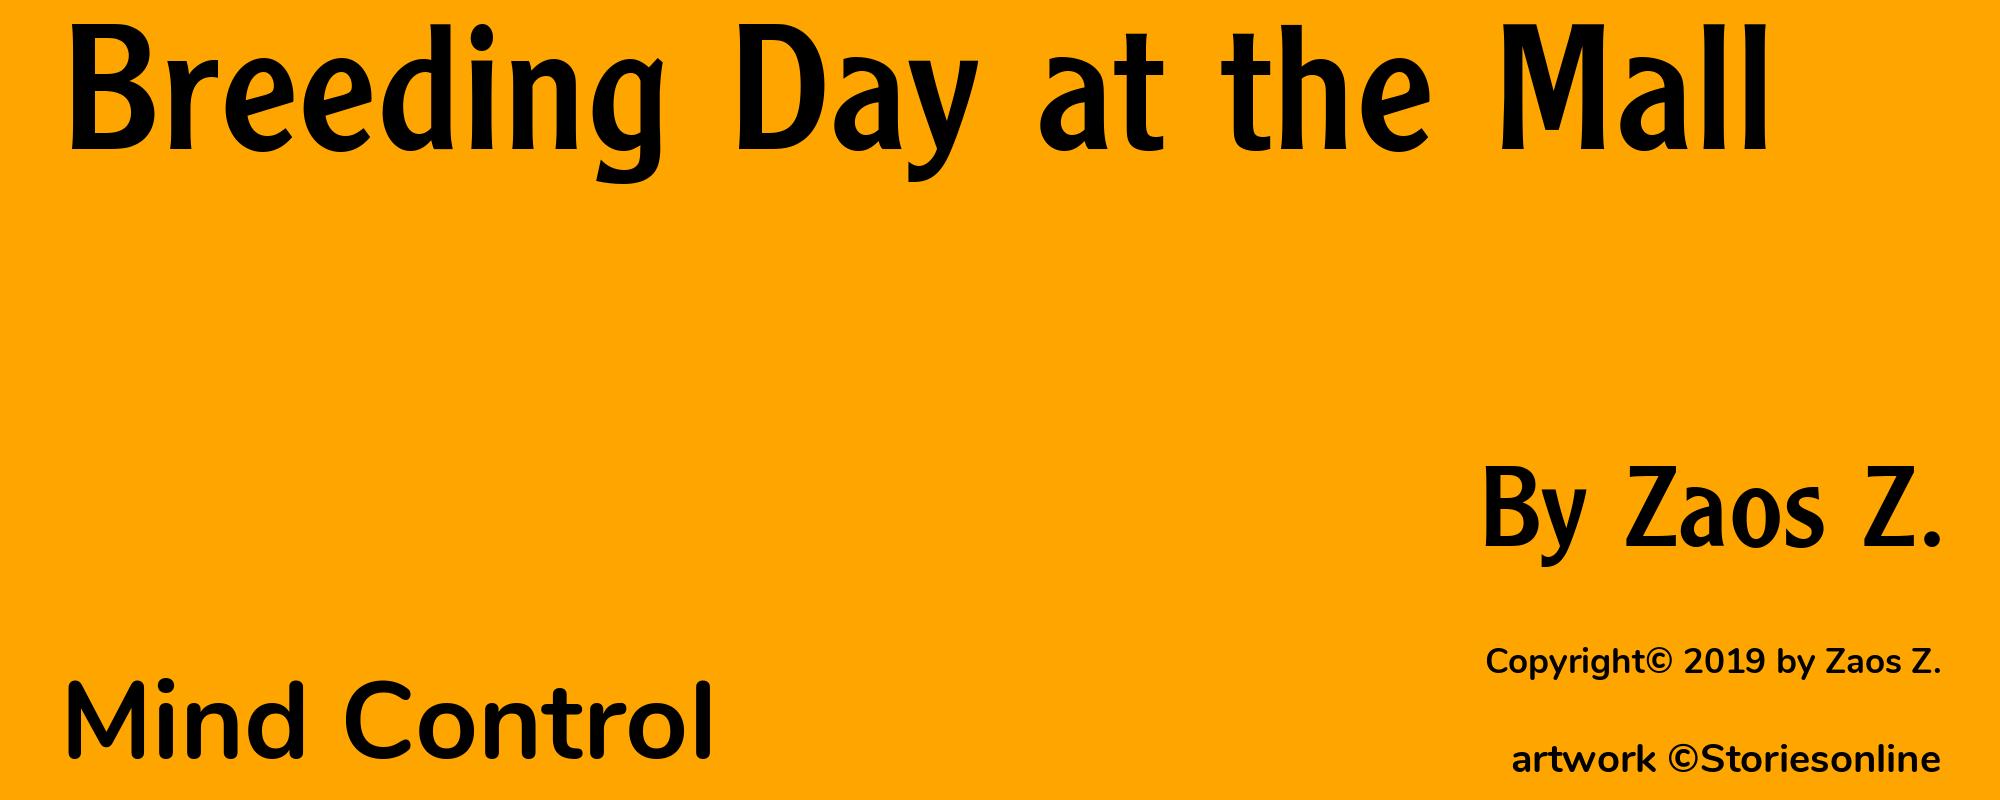 Breeding Day at the Mall - Cover